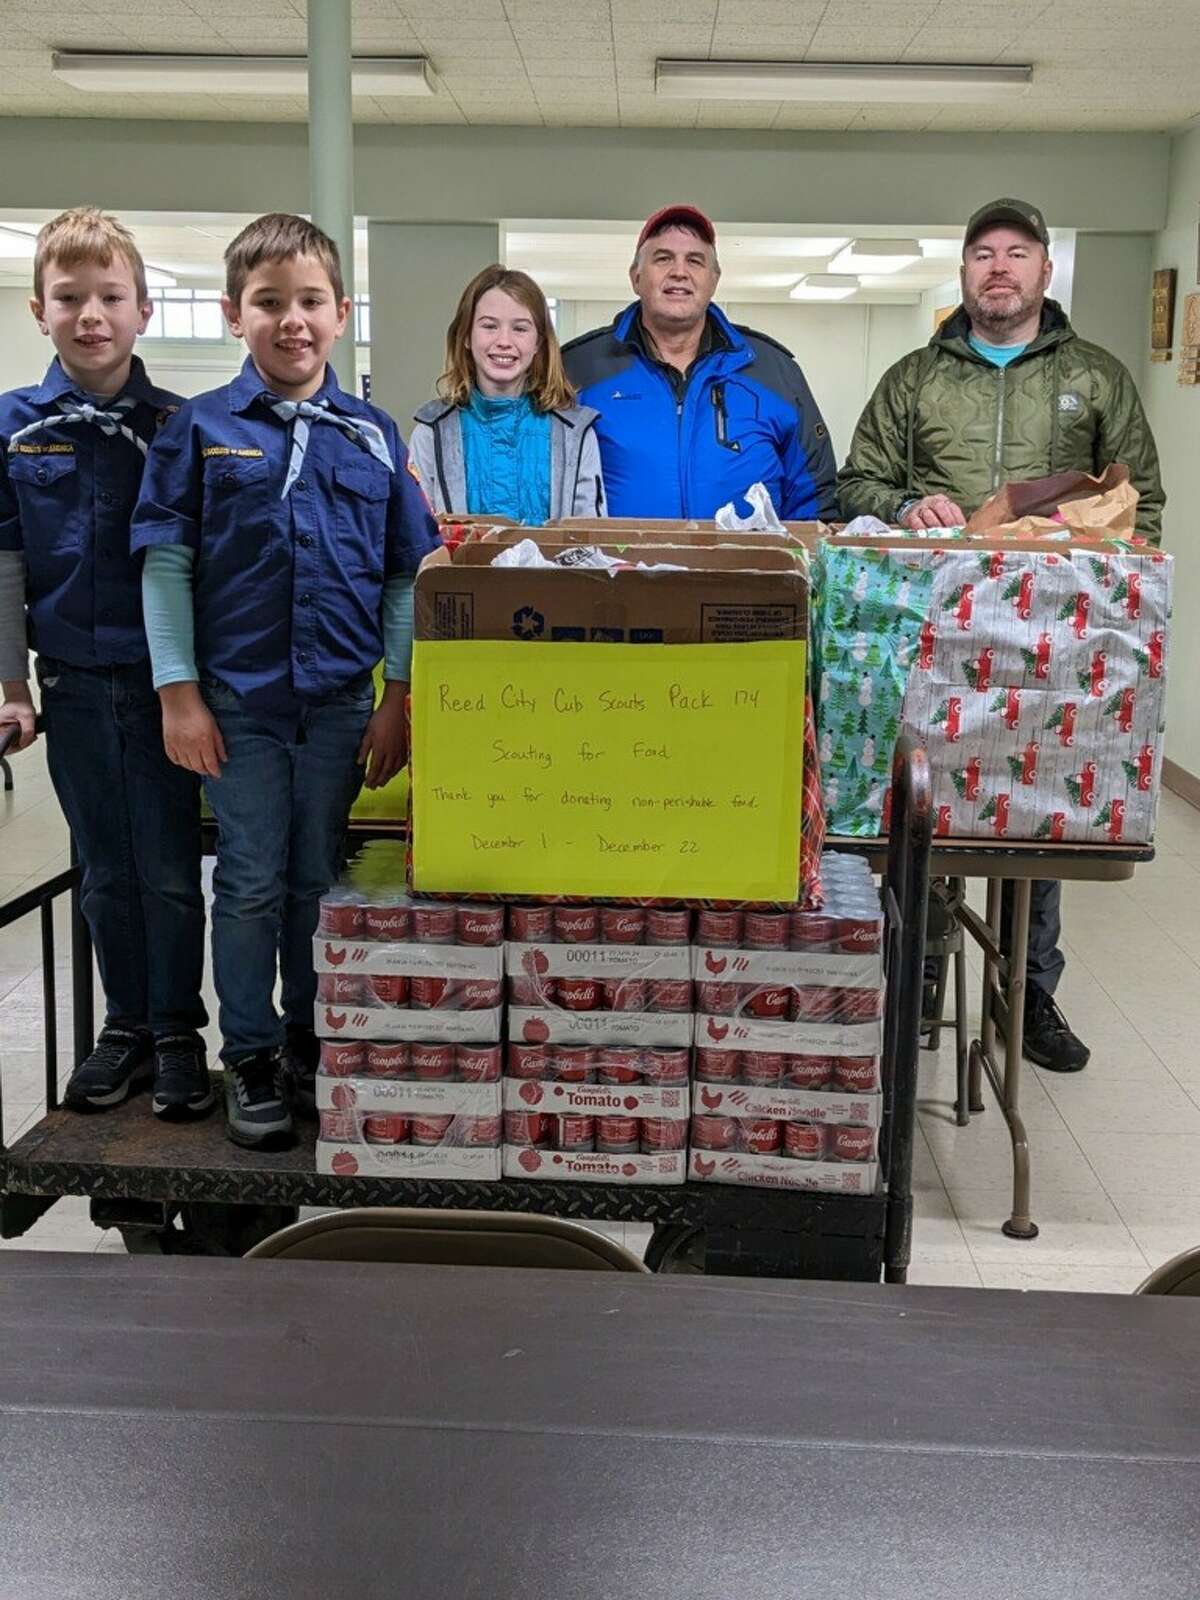 Reed City BSA Pack 174 recently completed their 2022 Scouting for Food campaign, donating collected items to Project Starburst Food Pantry. Pictured (left to right) are Bear Scouts Sean & Evan Brummeler, Margaret Brummeler, Charles Brummeler and Scout Leader Russ Nehmer.  